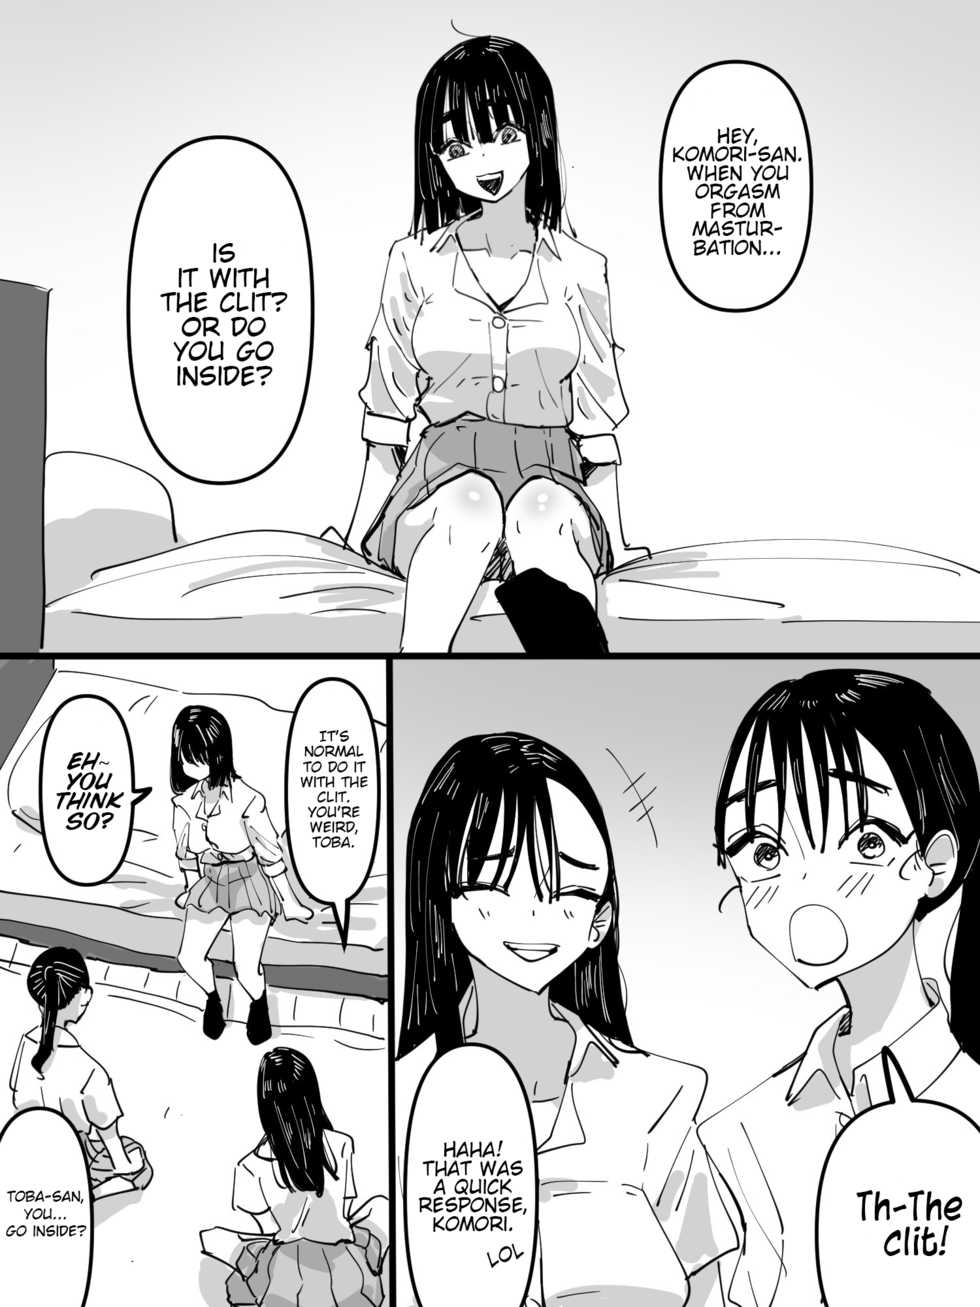 [Aweida] I Was Talking About Masturbation With My Friends and Ended Up Actually Crossing the Line [English][Goggled Anon][Digital] - Page 1